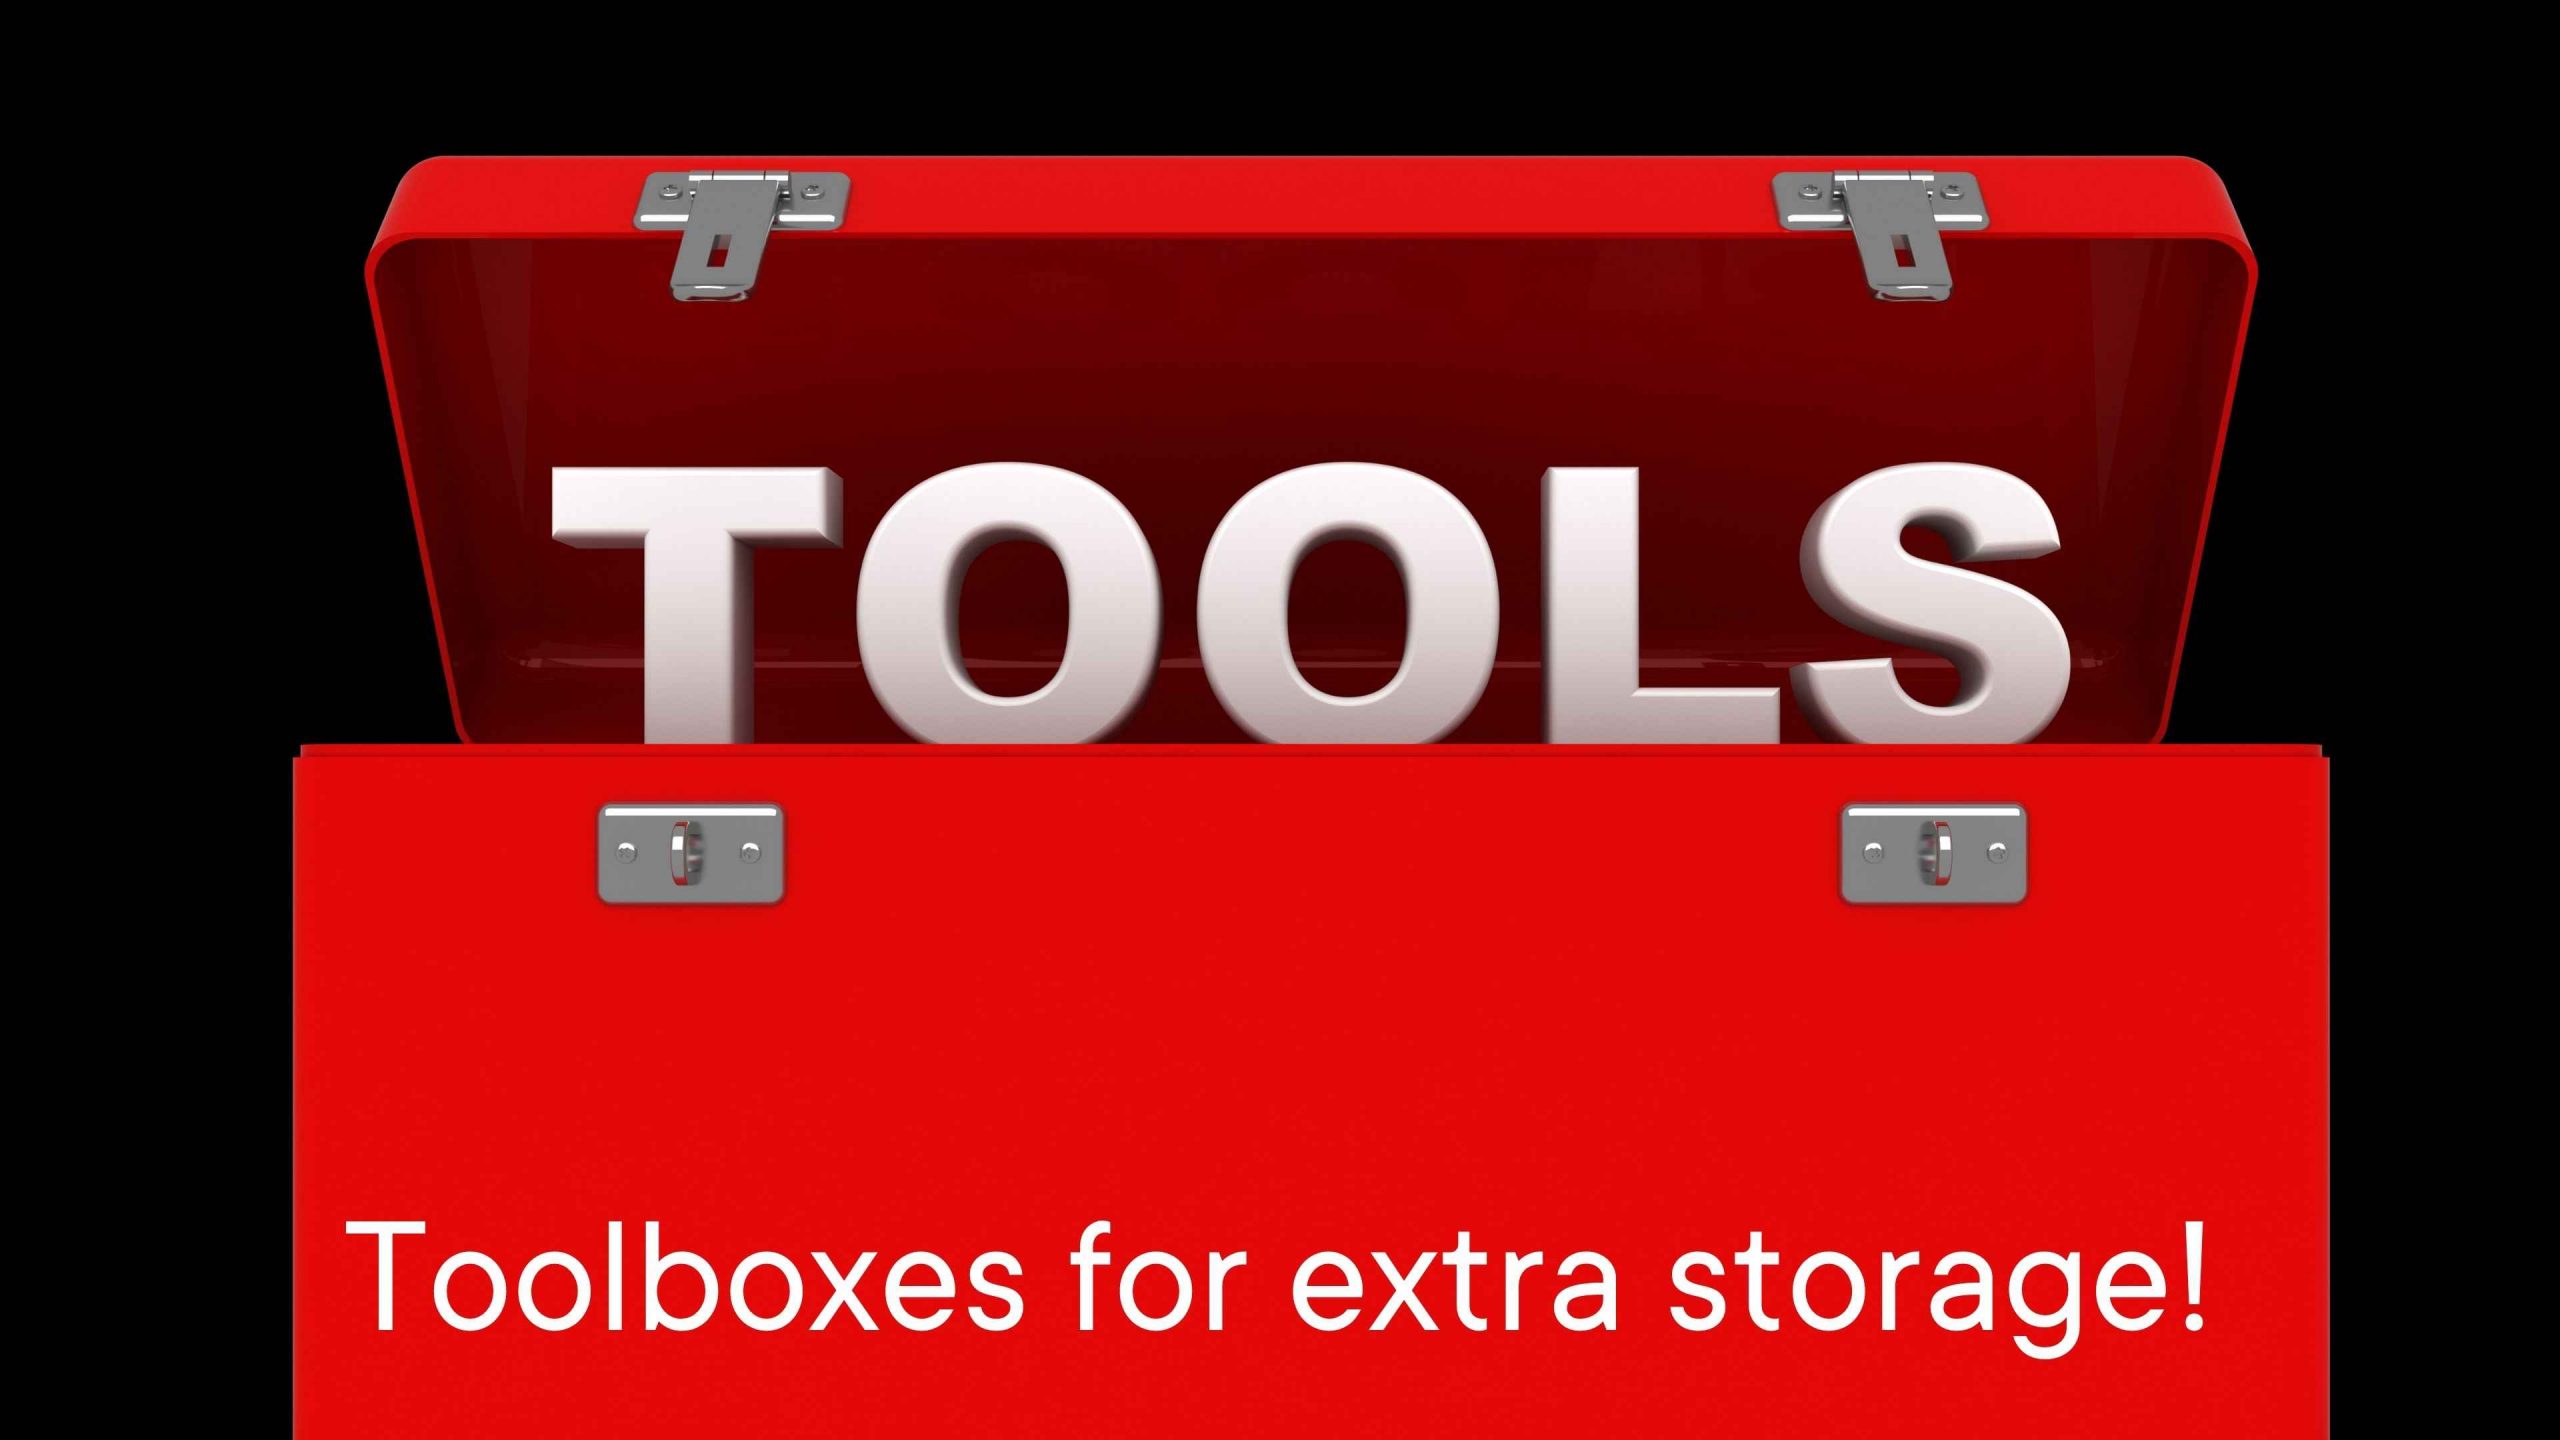 Toolboxes for extra storage!